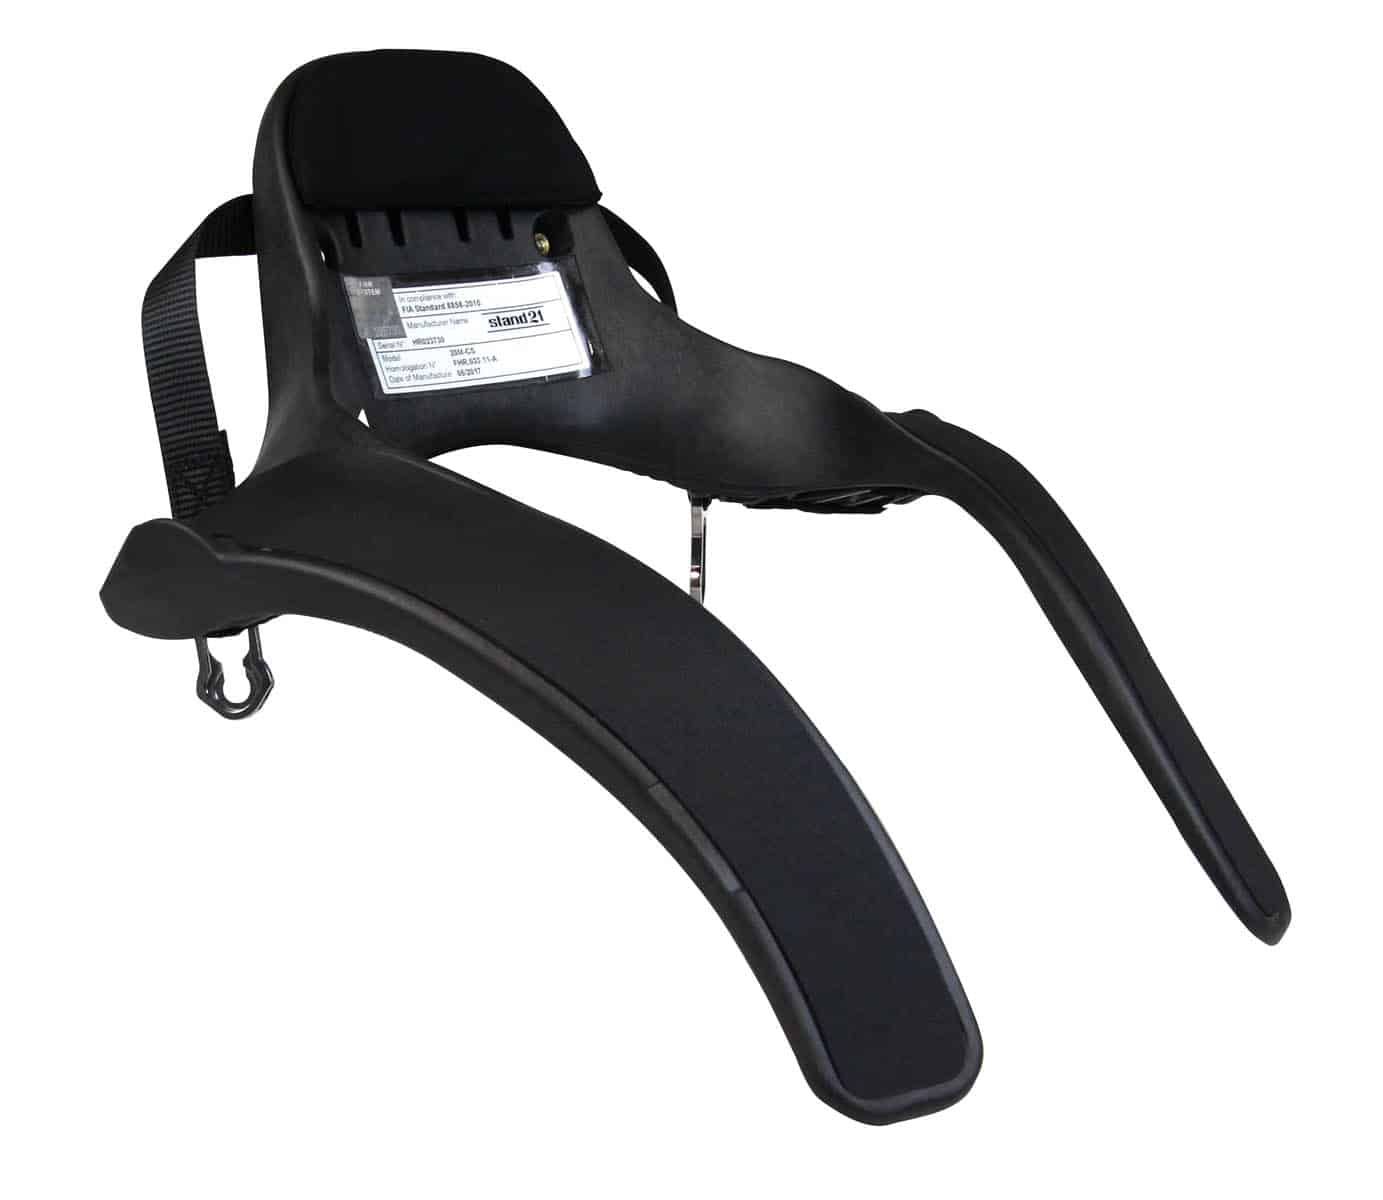 hans device stand 21 club